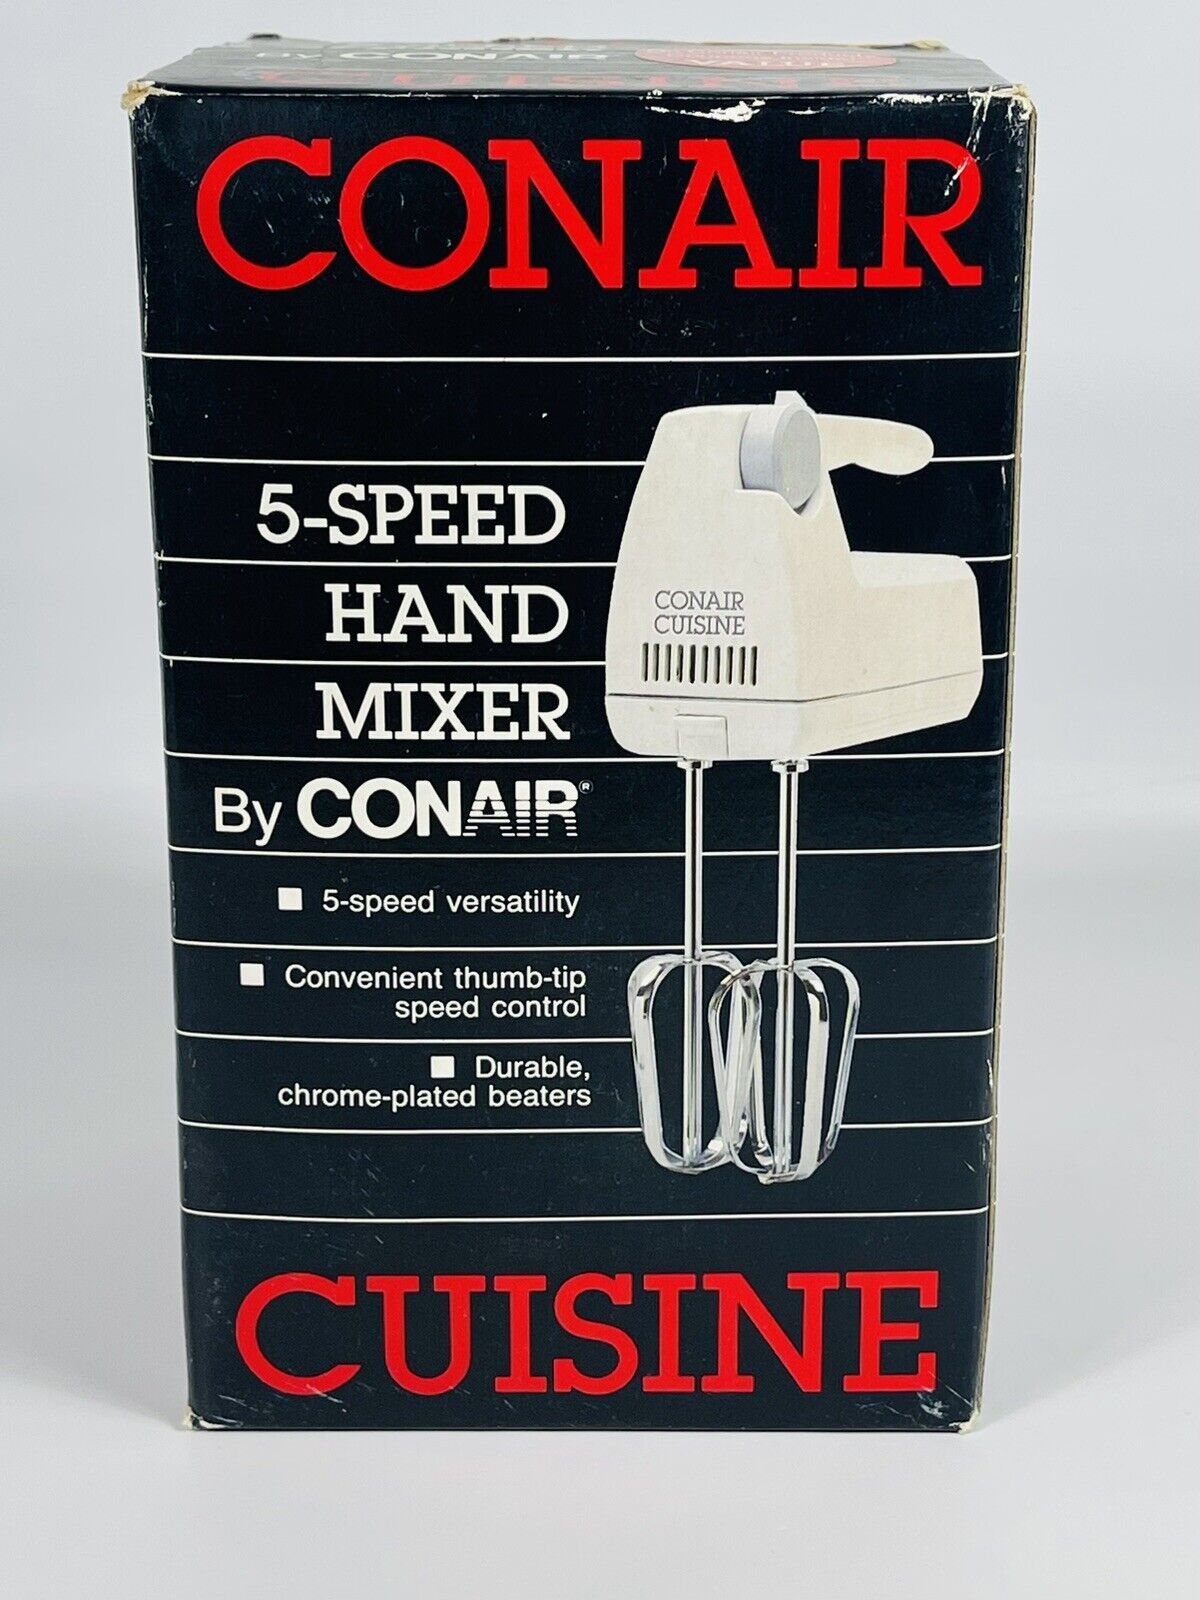 NOS Vintage 1986 Conair Cuisine By Conair 5 Speed Hand Mixer New Old Stock 